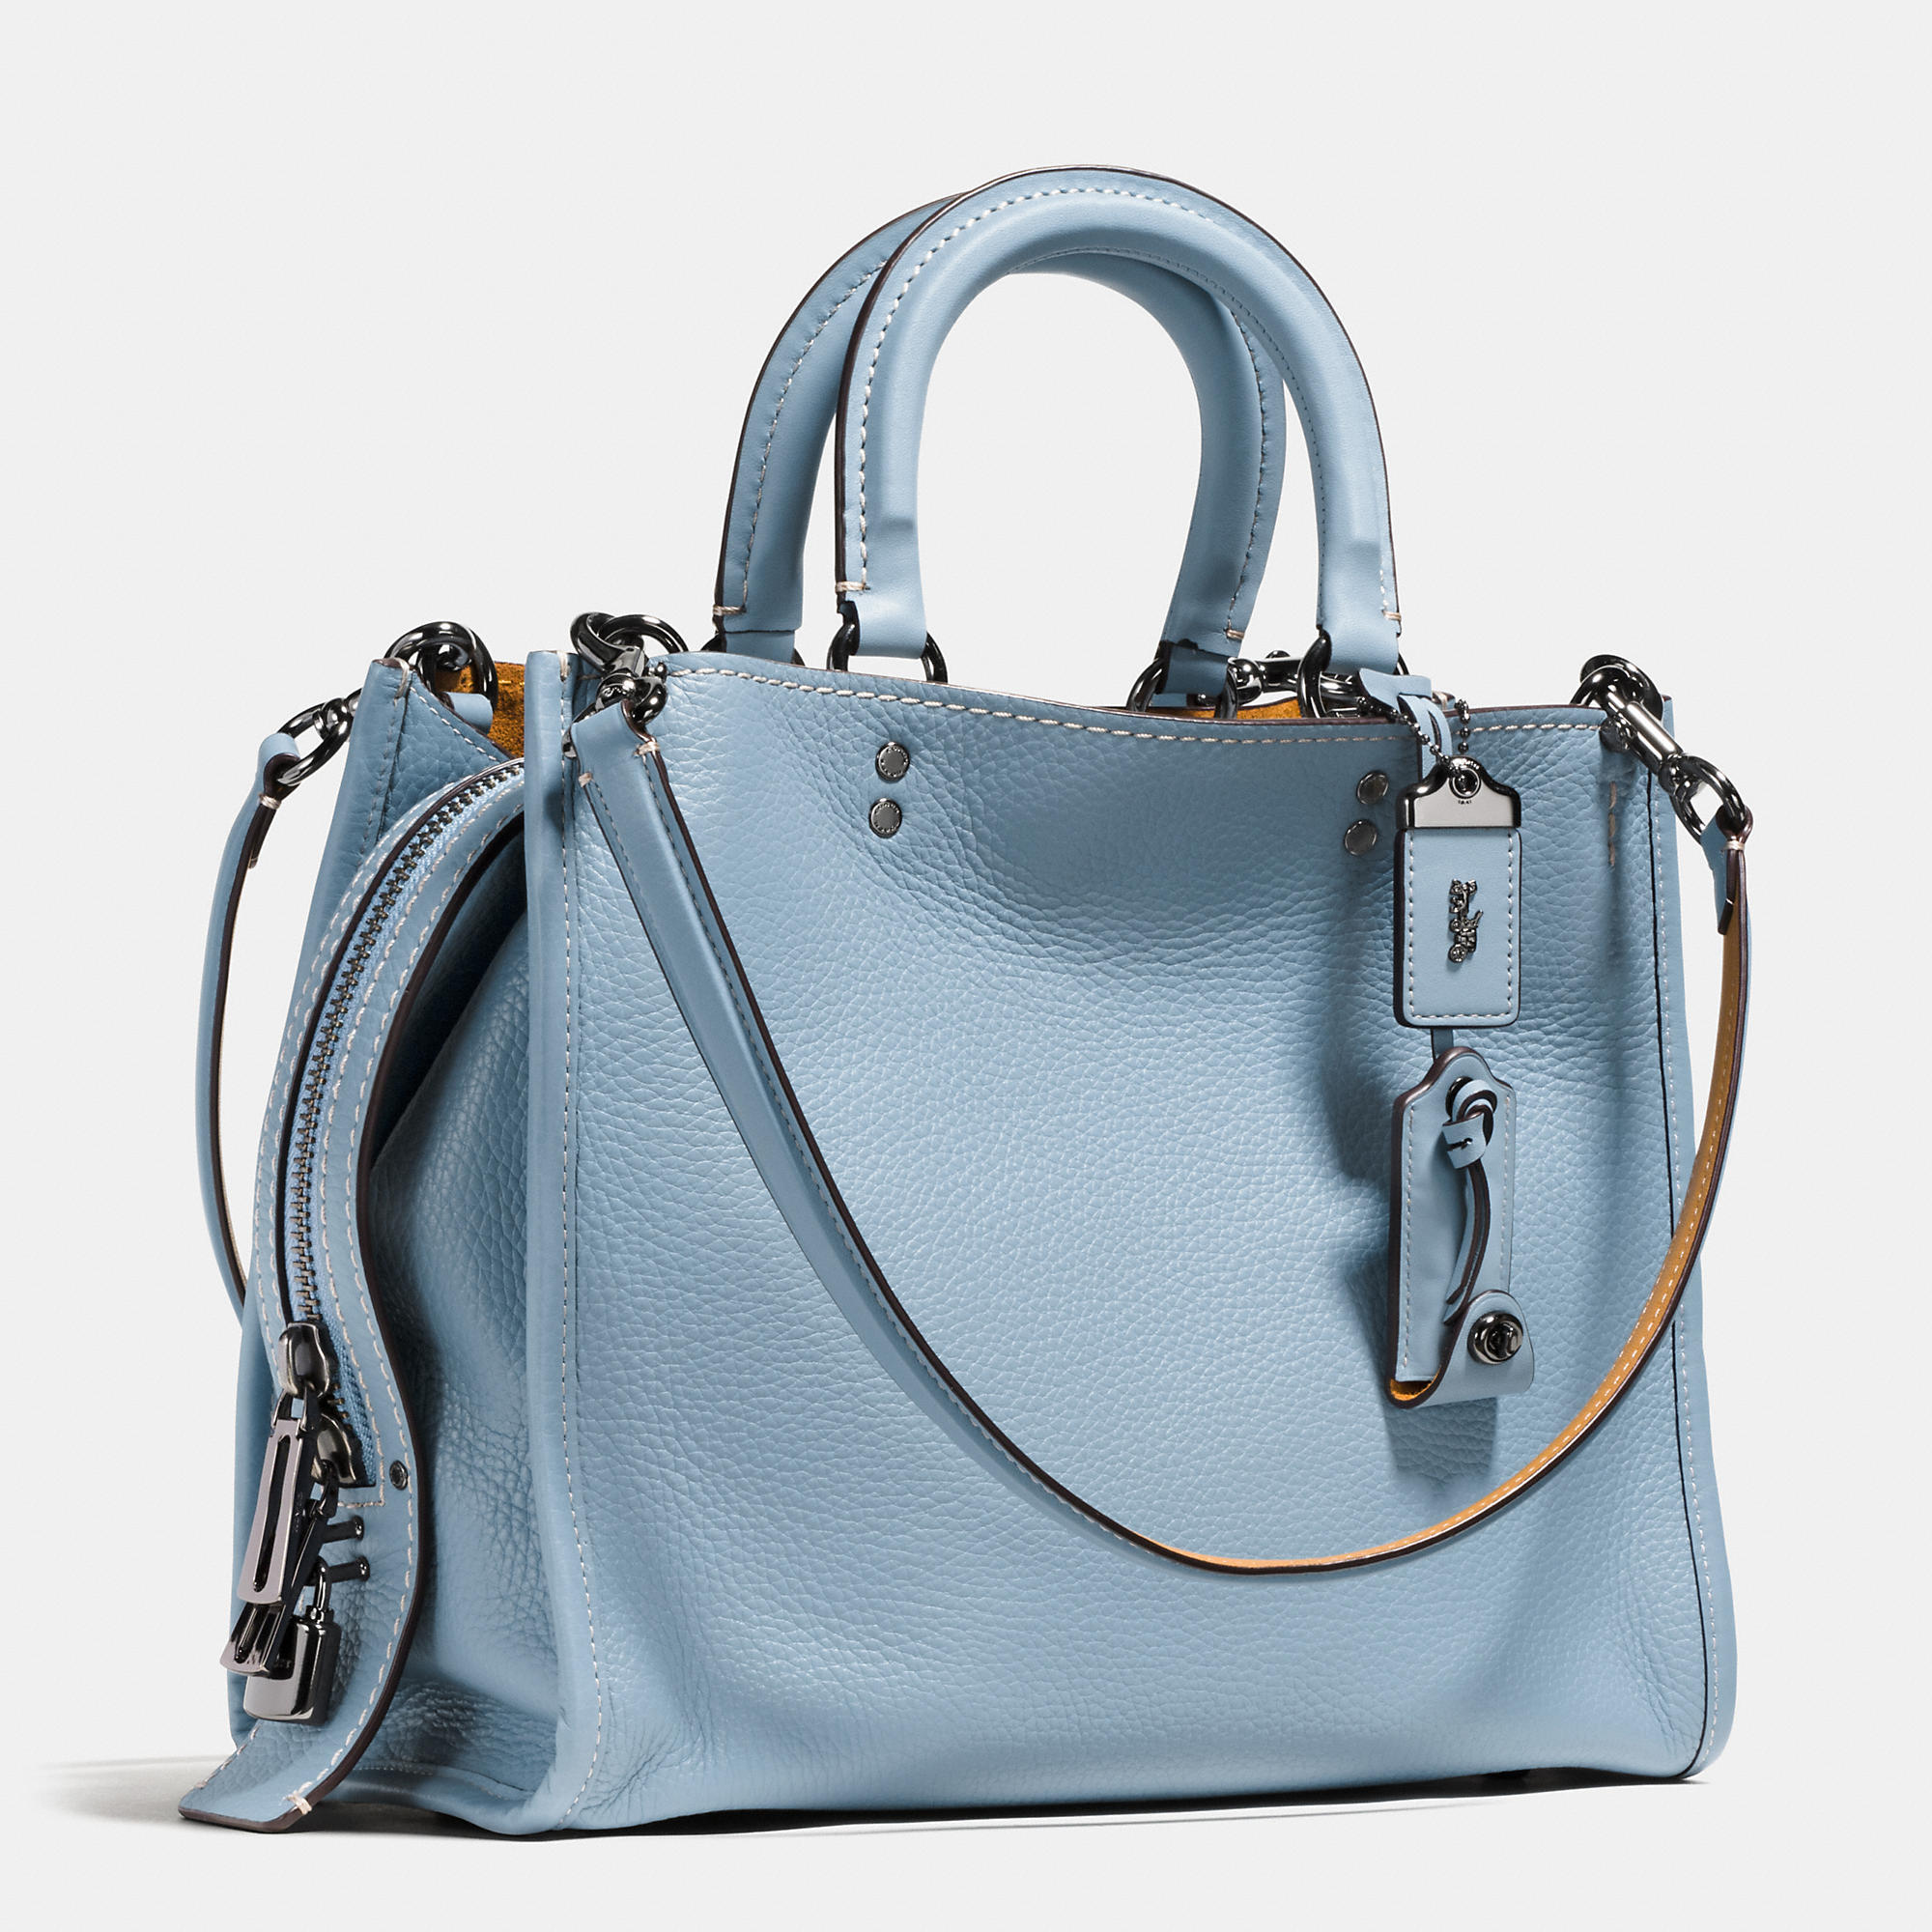 2016 New Fashion Coach Rogue Bag In Glovetanned Pebble Leather